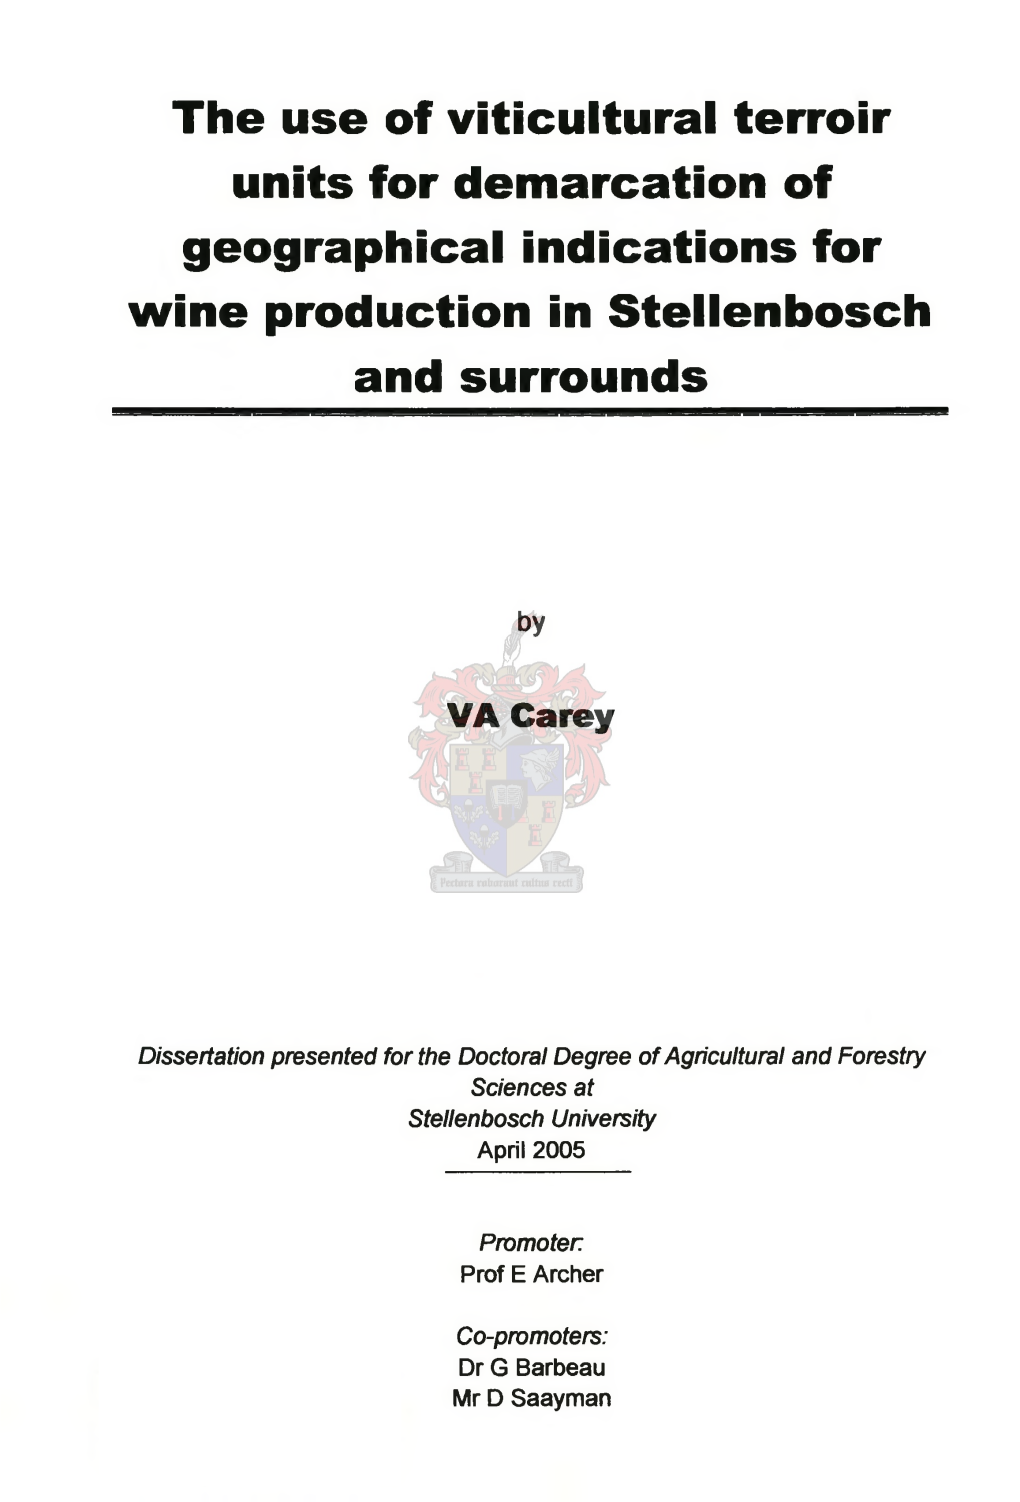 The Use of Viticultural Terroir Units for Demarcation of Geographical Indications for Wine Production in Stellenbosch and Surrounds